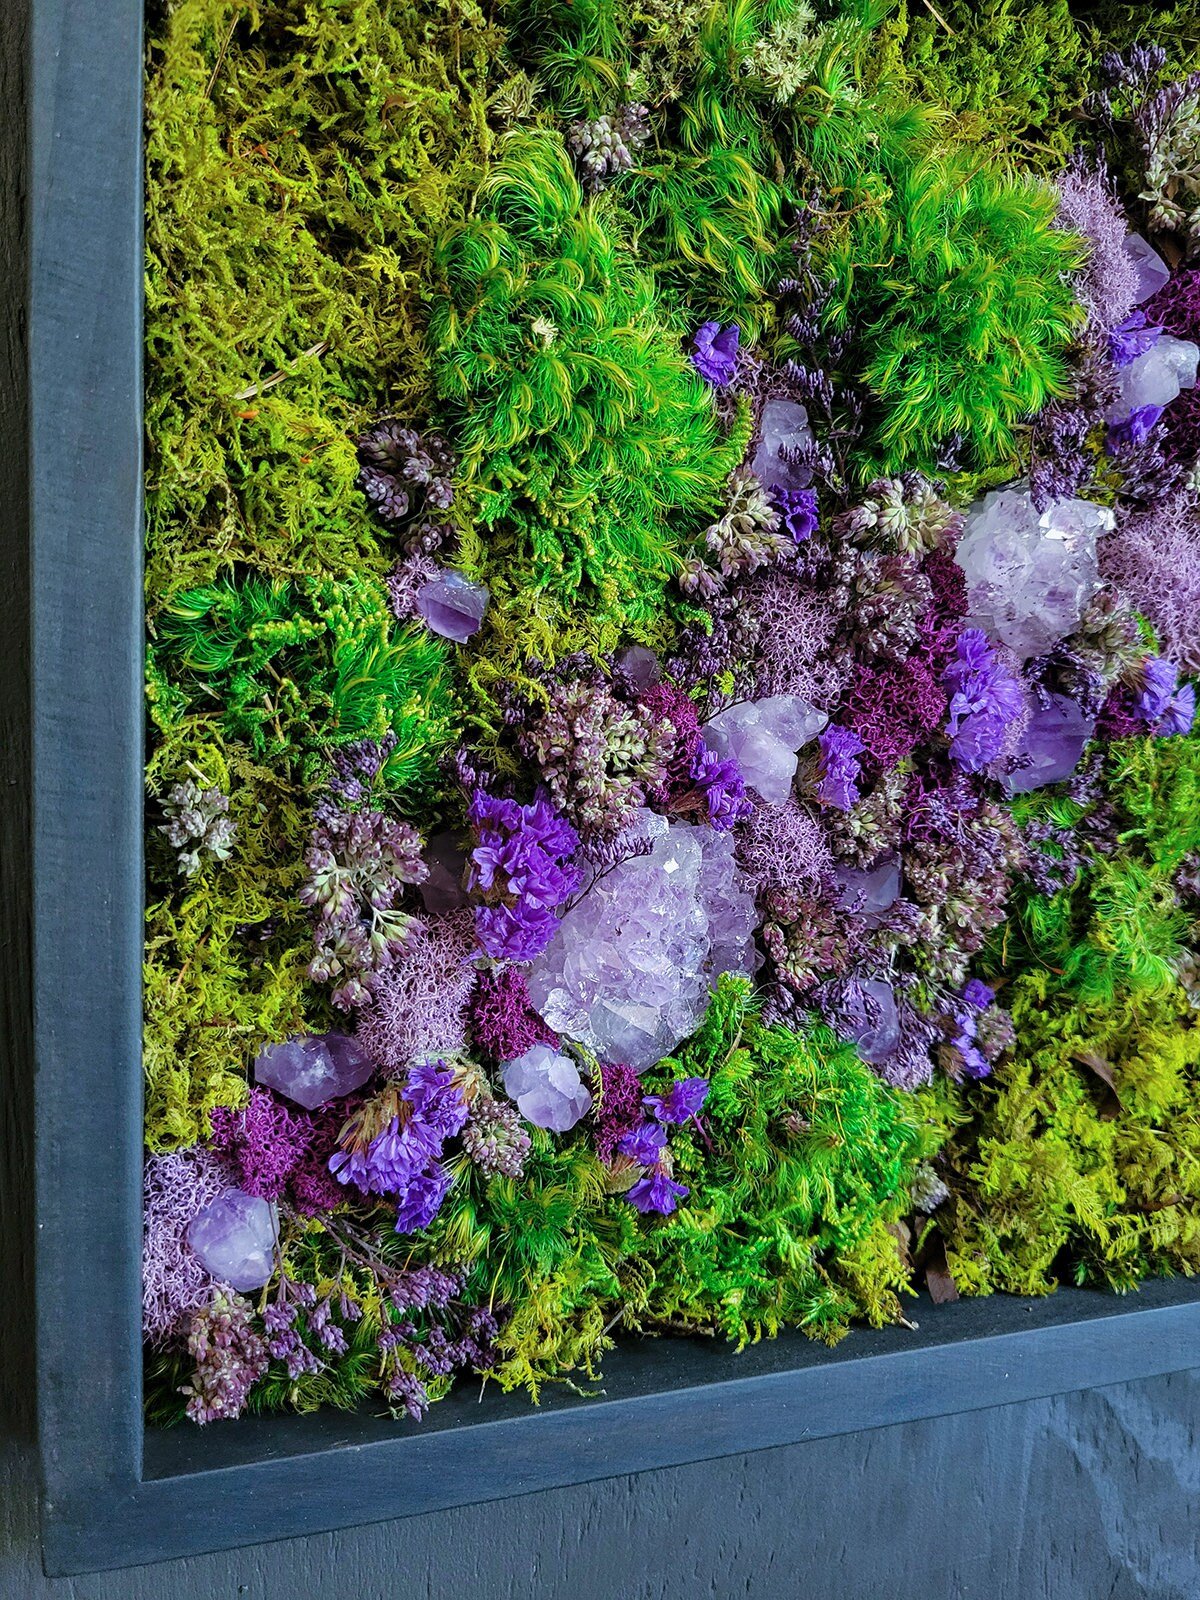 Preserved Moss Frame w Gems / Crystals - Mossy Moss by Olia